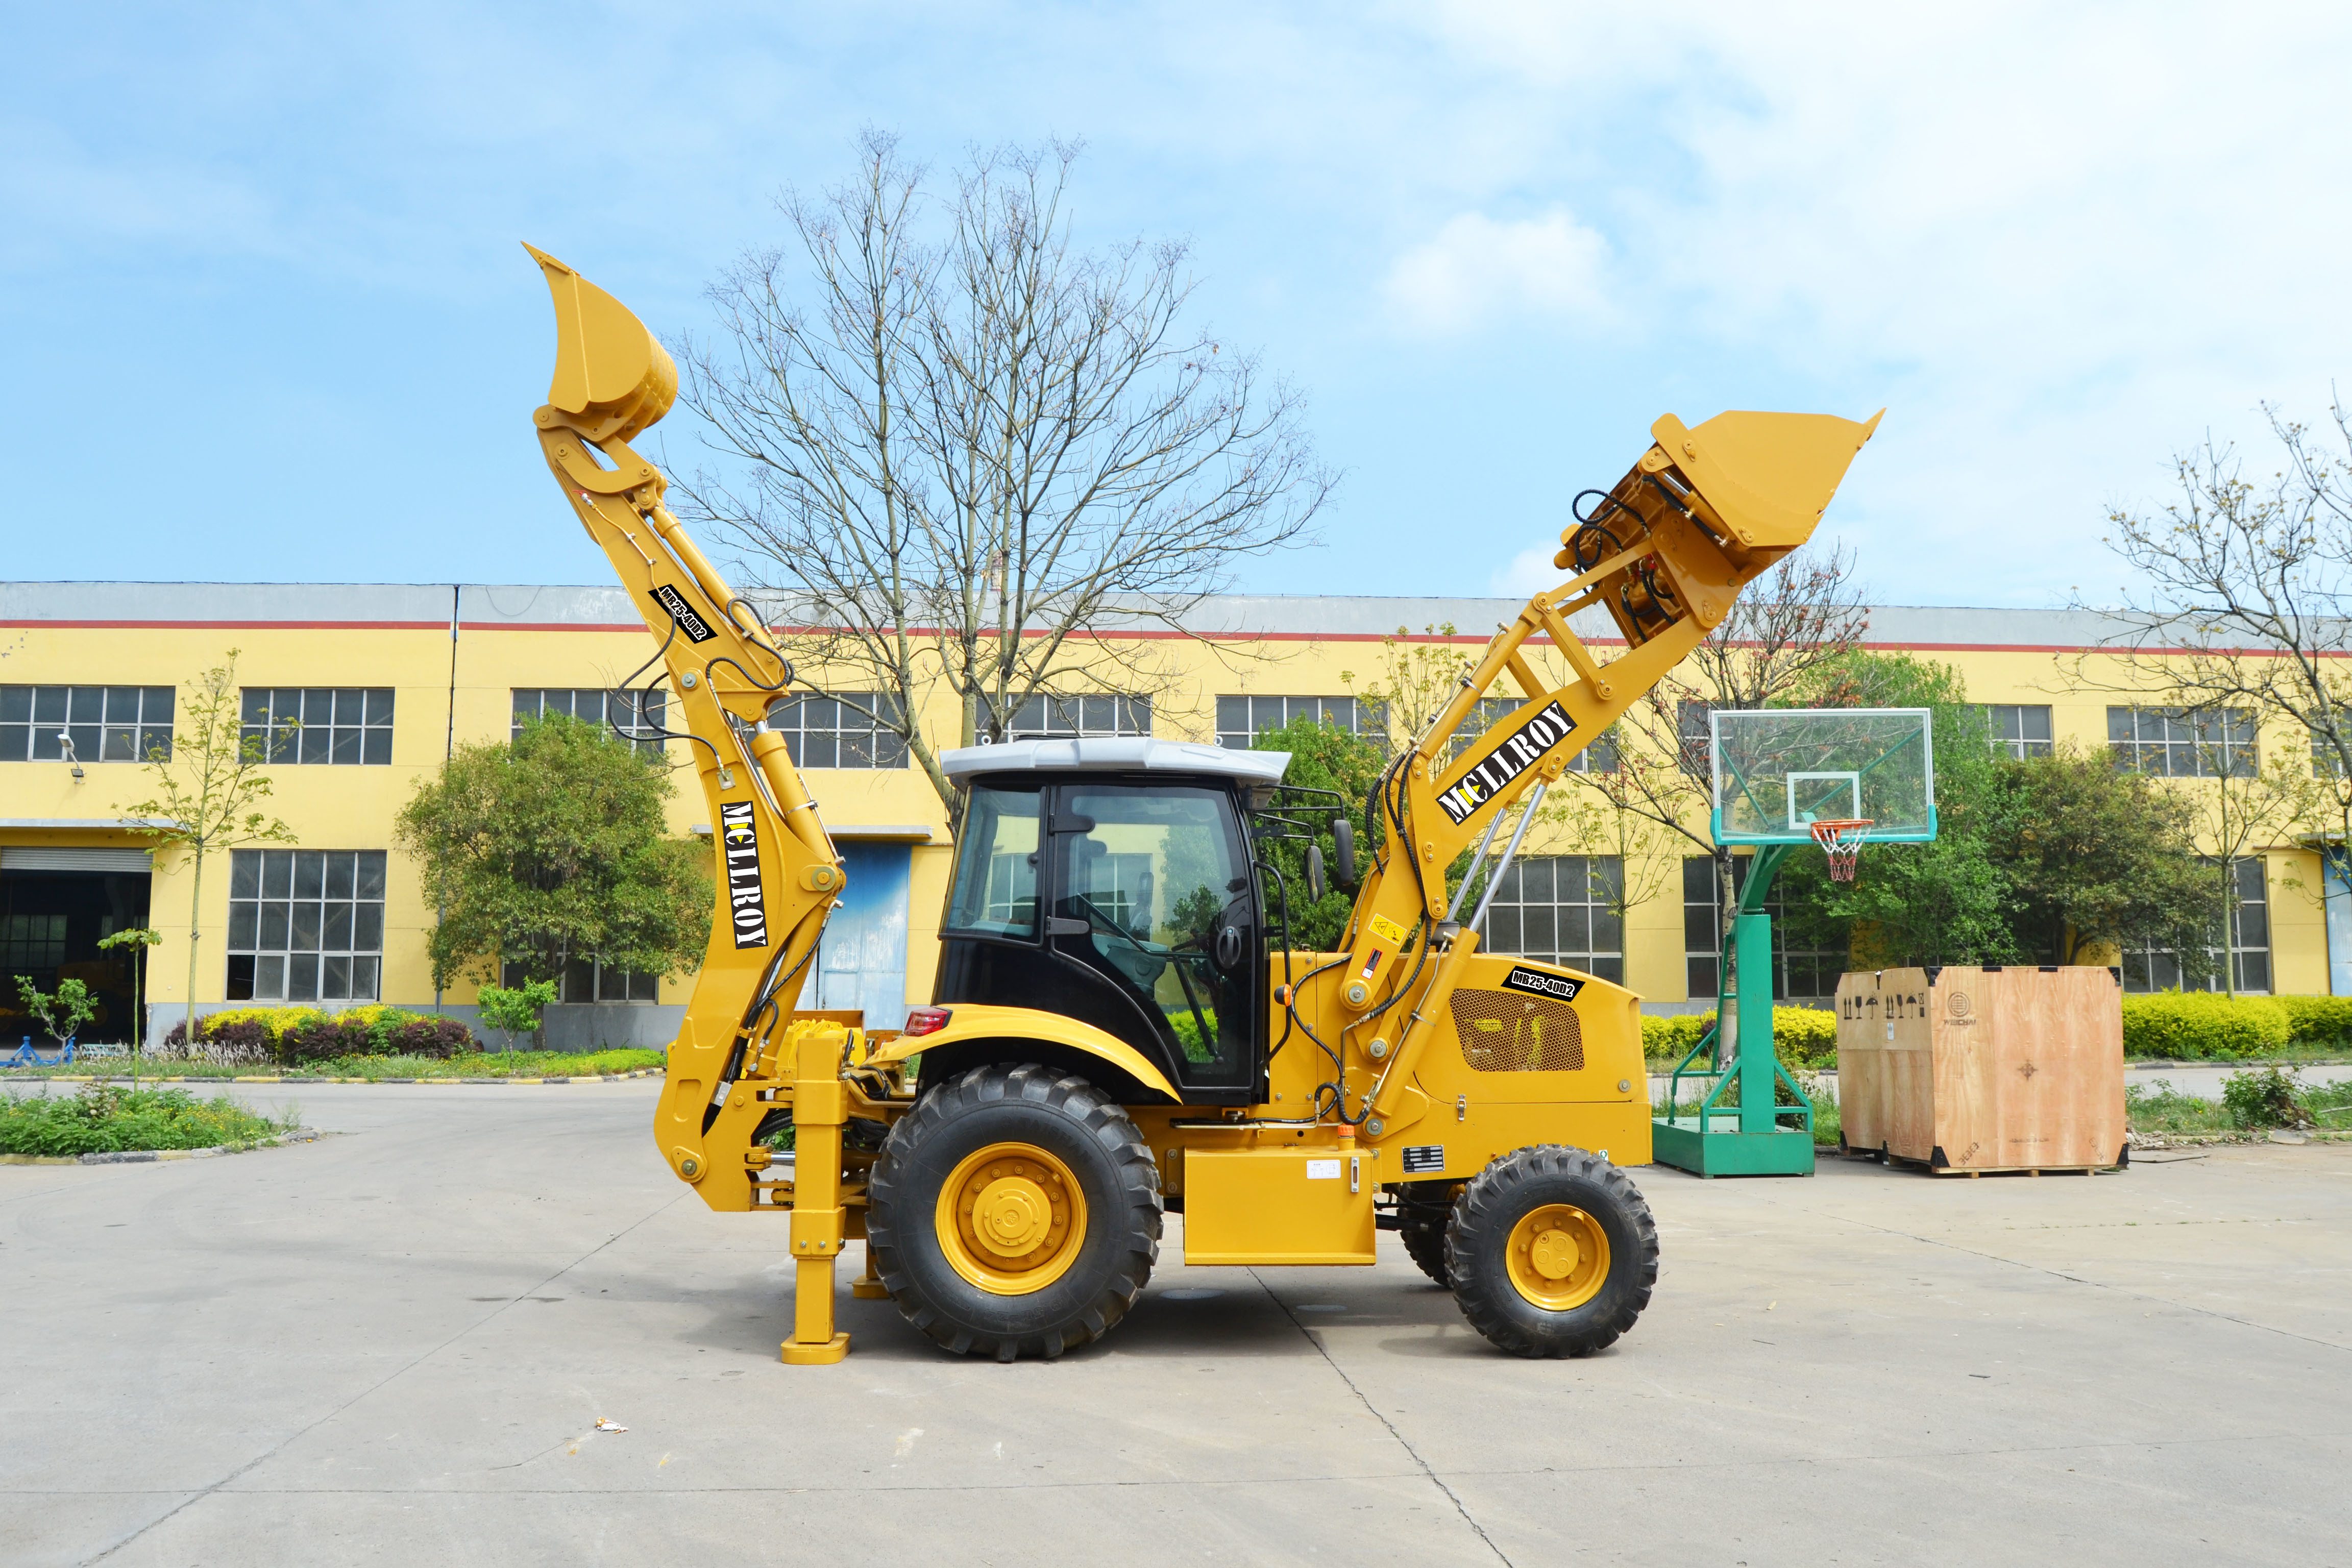 Articulated Compact Backhoe Loader MCLLROY MB30-40D 4m Digging Depth 75-92 Kw